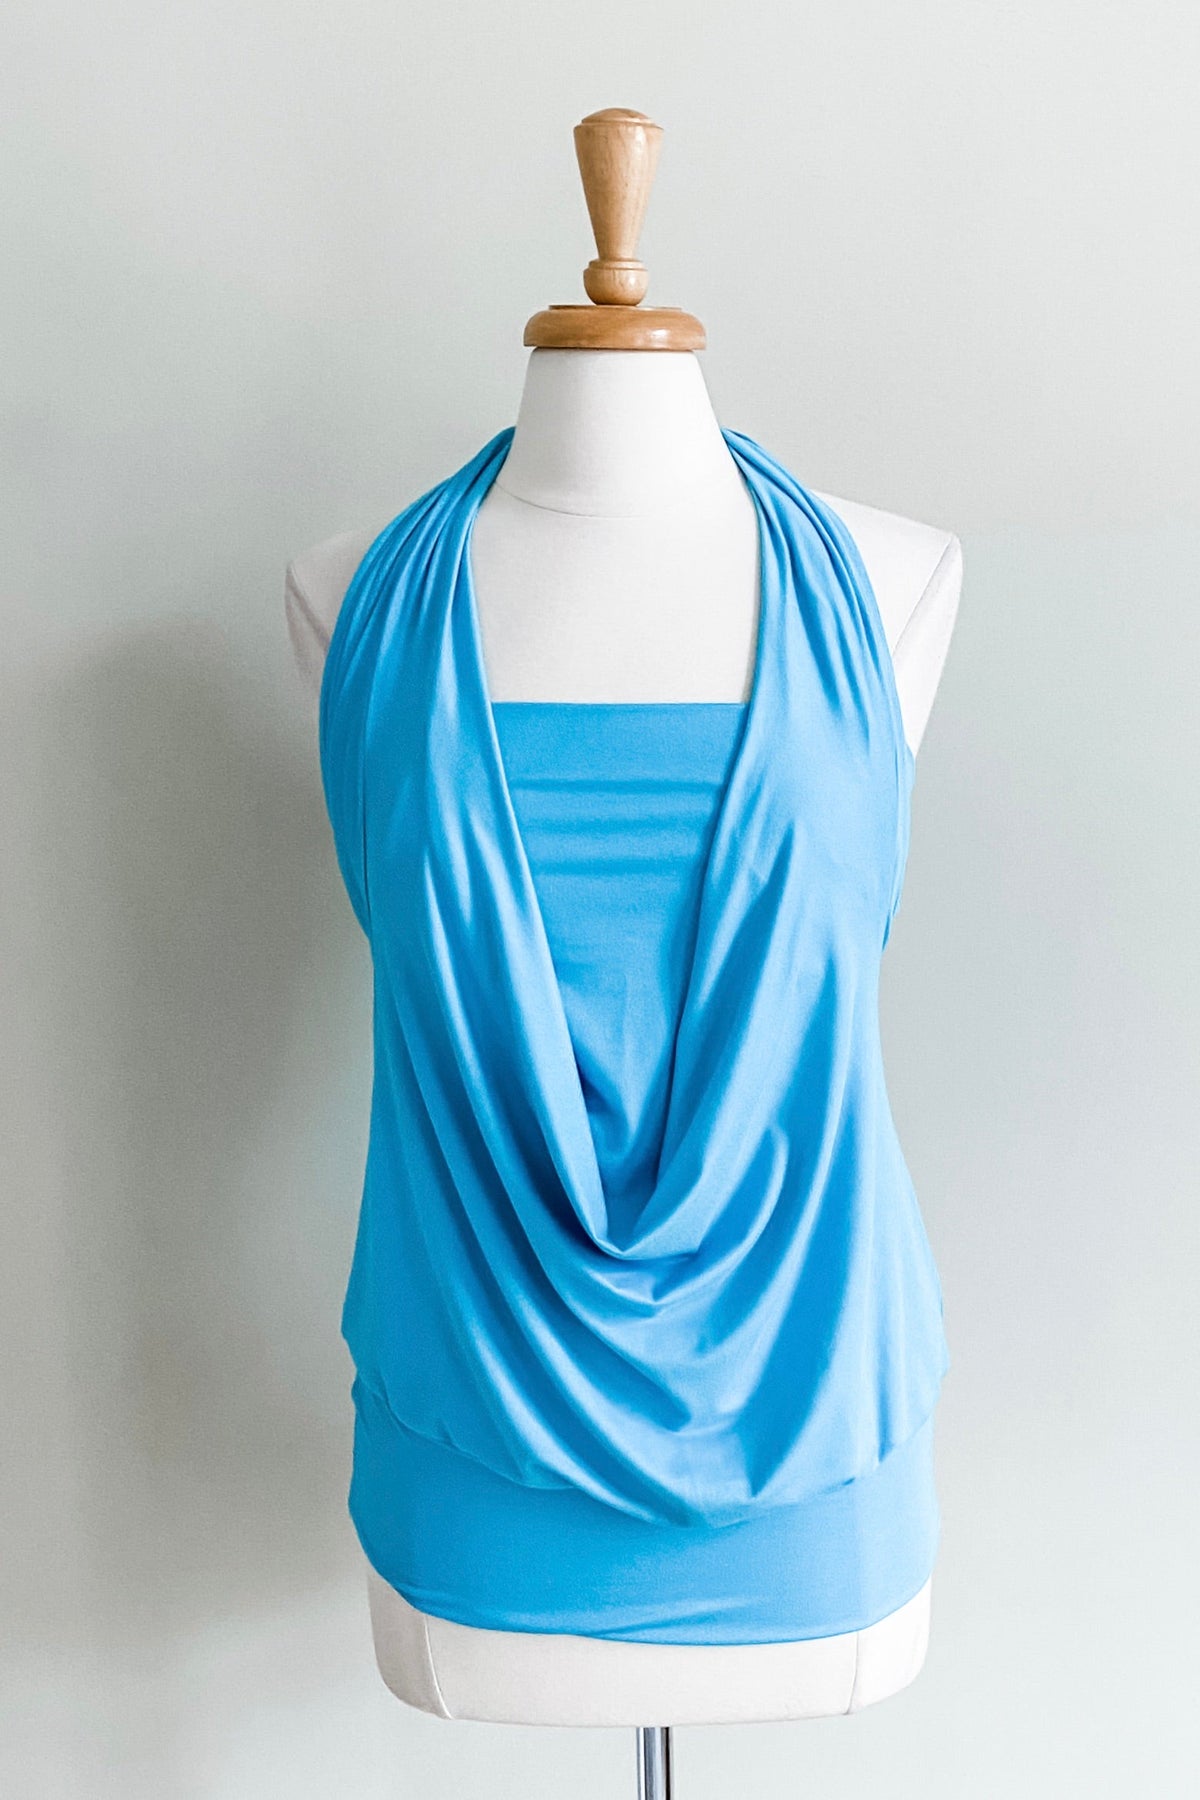 Diane Kroe One-4-All Top (Turquoise) - Warm Weather Capsule Collection